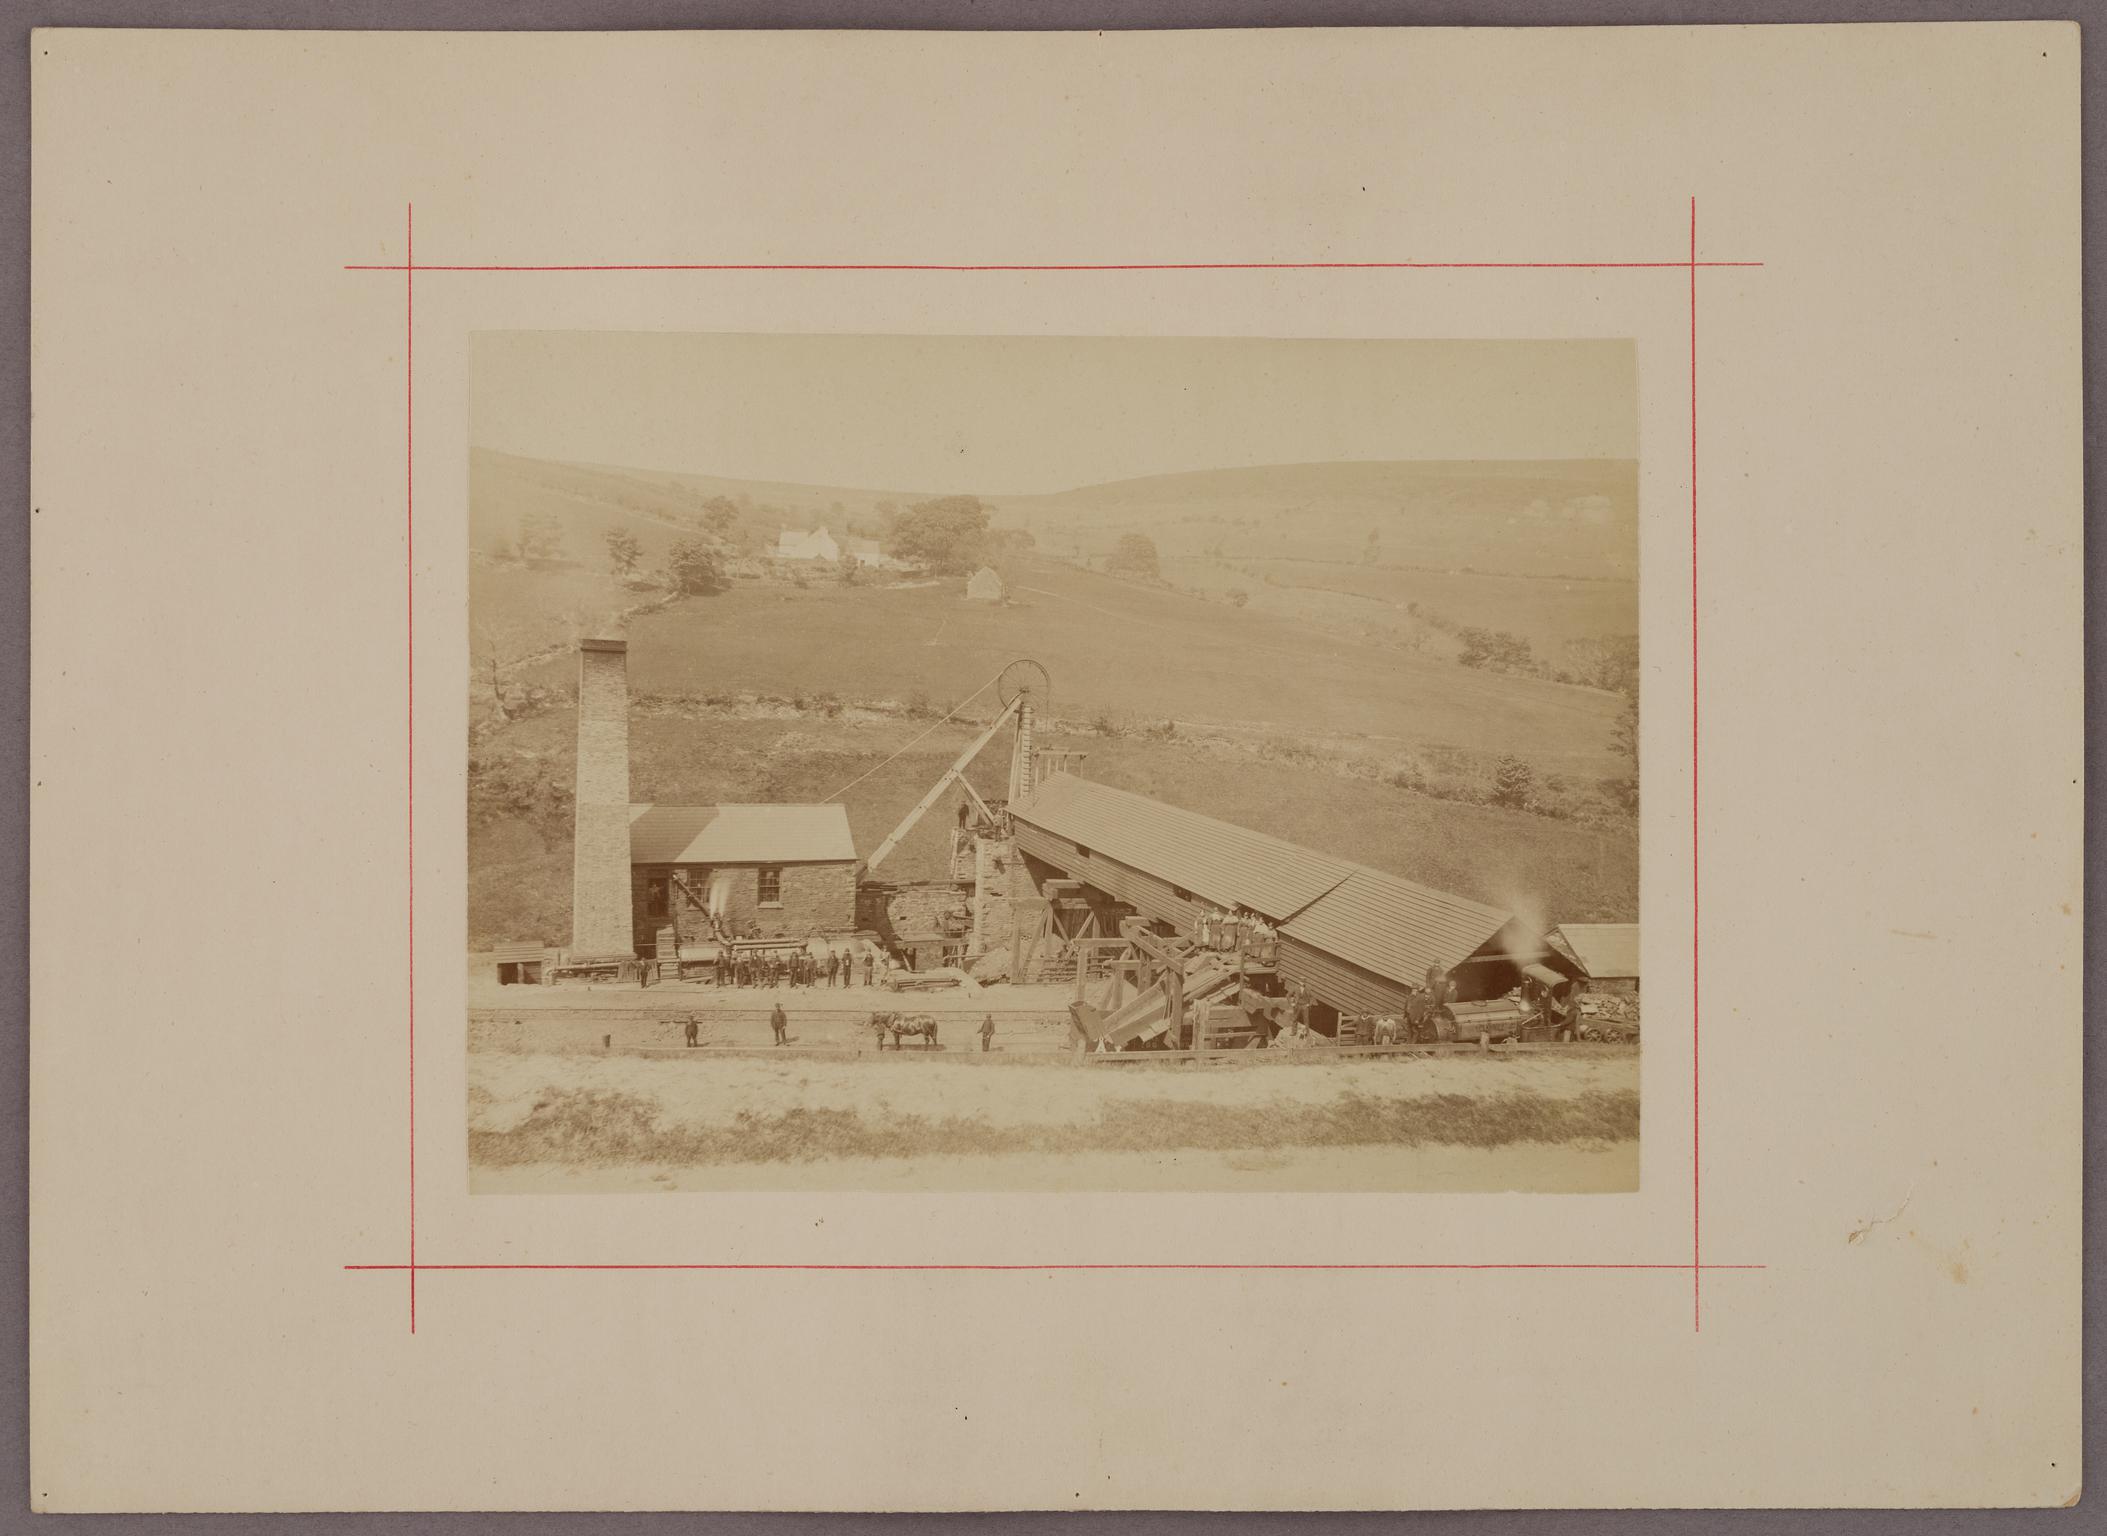 Cilhaul Colliery, photograph